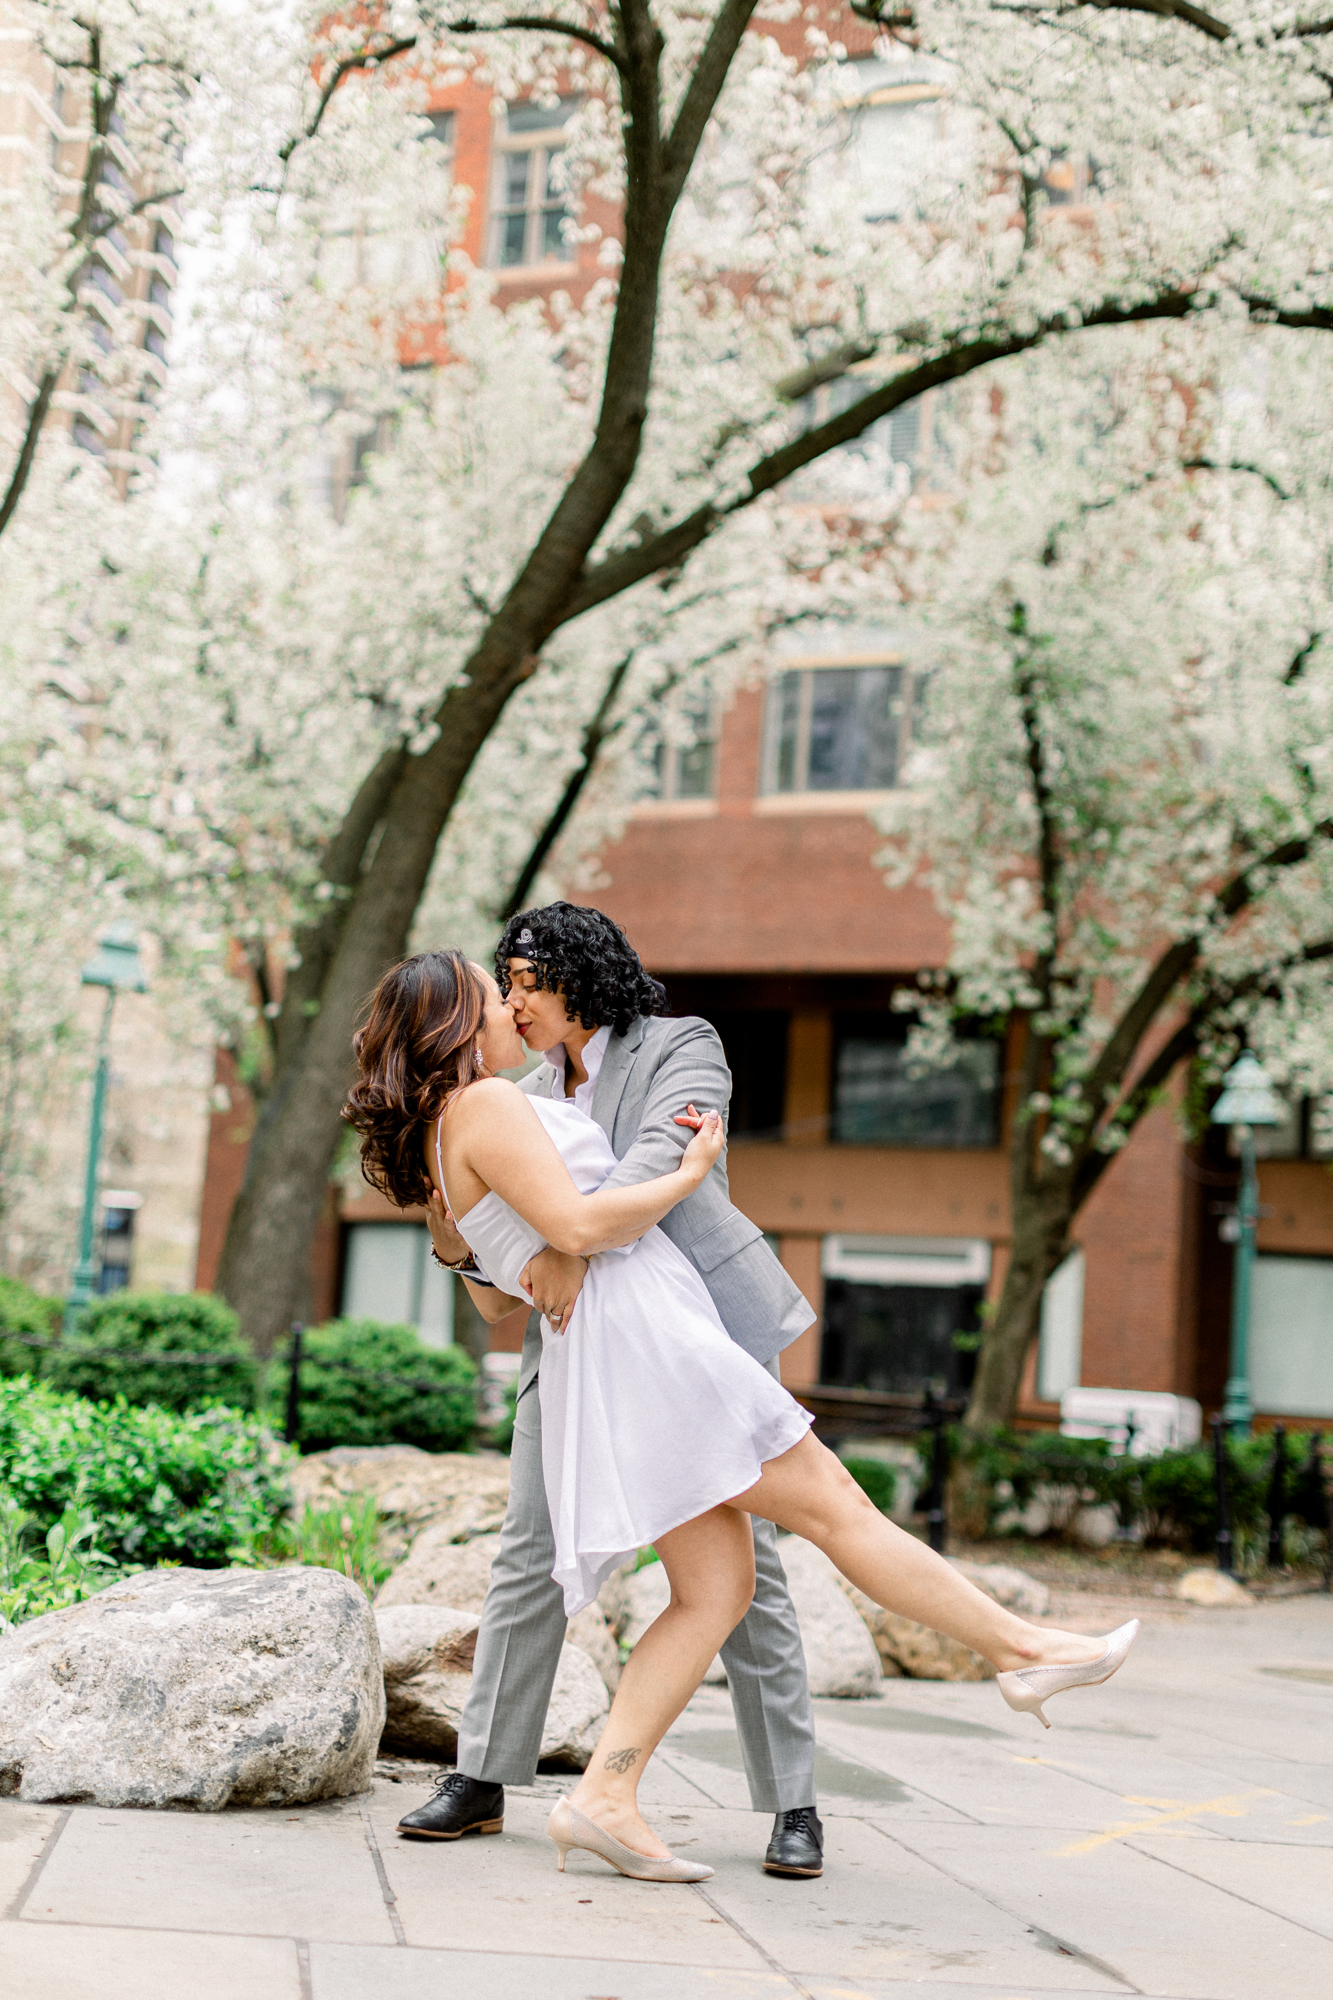 Charming NYC Engagement Photography with Spring Blossoms